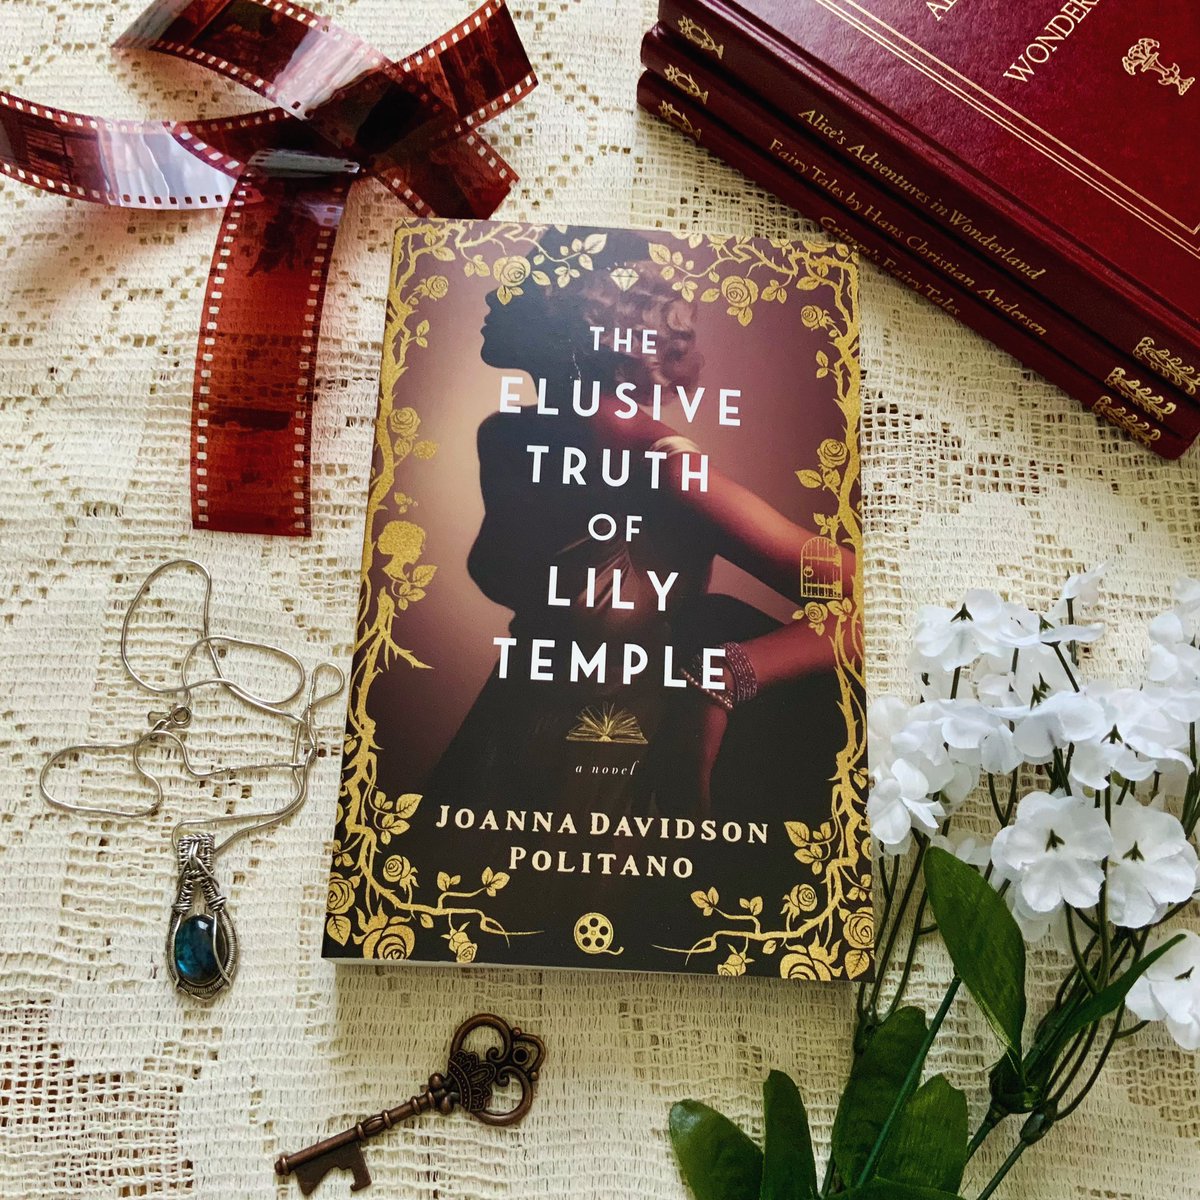 Happy Release Day! @politano_joanna Check out this amazing book!  instagram.com/p/C5jCLk9LUfl/… Now available here: a.co/d/6hP535f @RevellBooks #theelusivetruthoflilytemple #joannadavidsonpolitano #bookbirthday #newbook #BookTwitter #BookReview #BookRecommendation #silentfilm